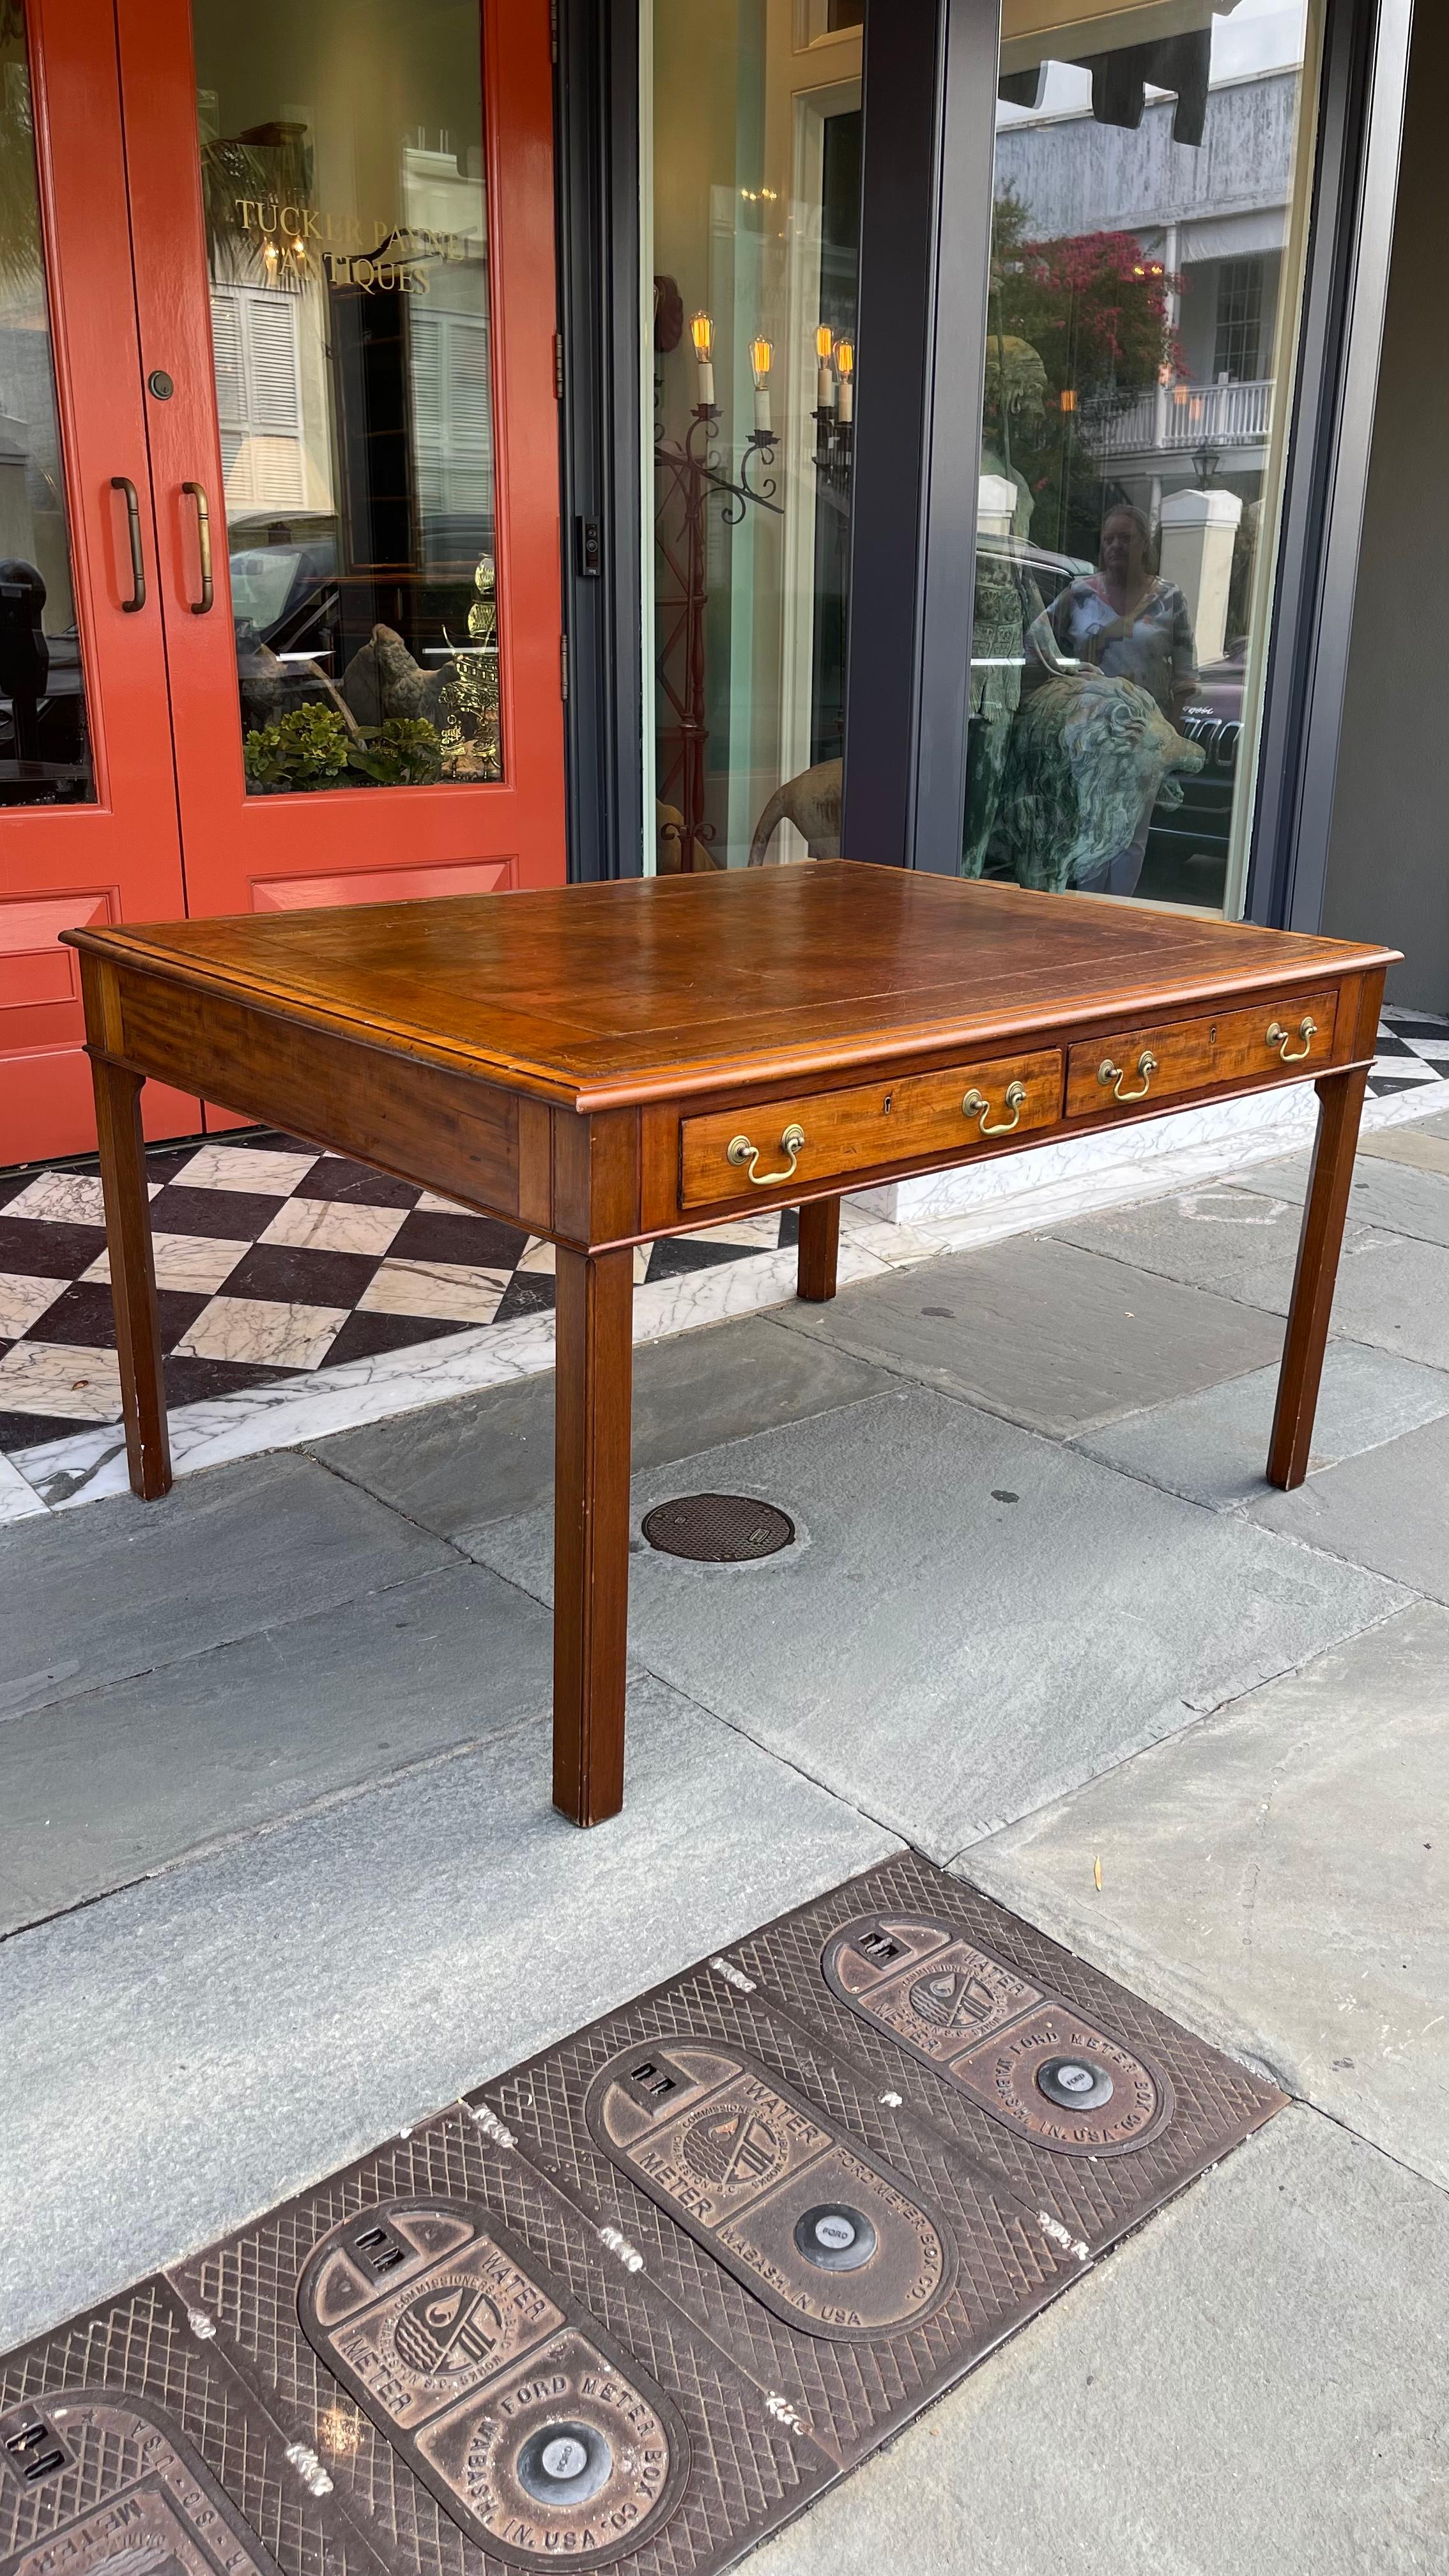 English mahogany writing desk with four drawers. Finished on all four sides so can be used as partners desk or floating in room. Leather surface has lovely patina with leather tooling and gold gilt accents.